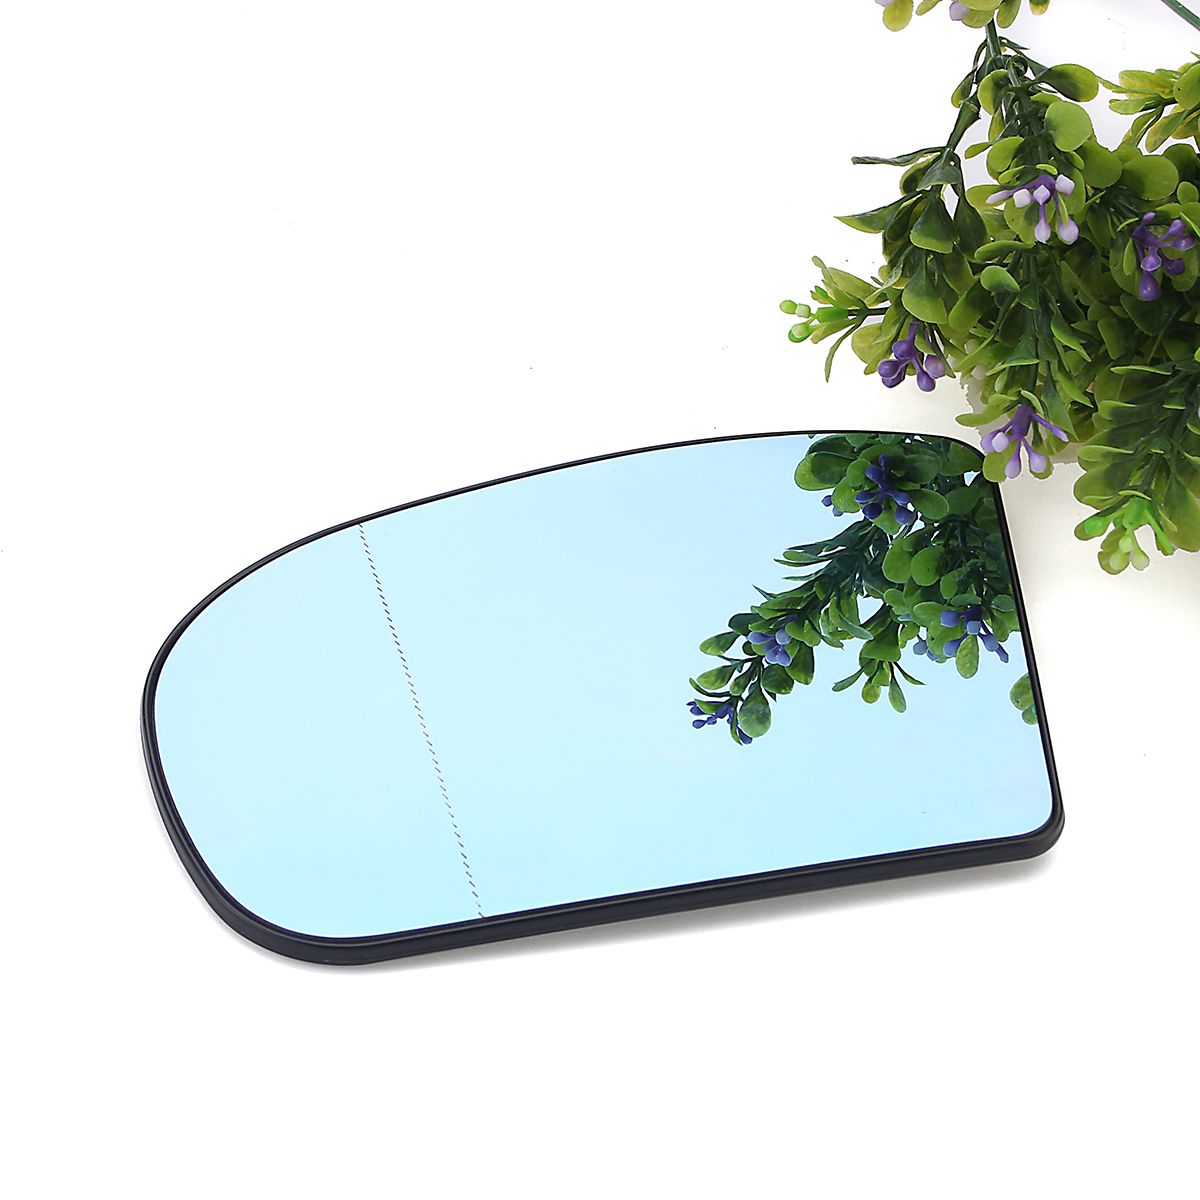 Car-LeftRight-Blue-Anti-Glare-Heated-Rearview-Mirror-Glass-For-Benz-C-E-Class-W211-W203-A2038100121--1514971